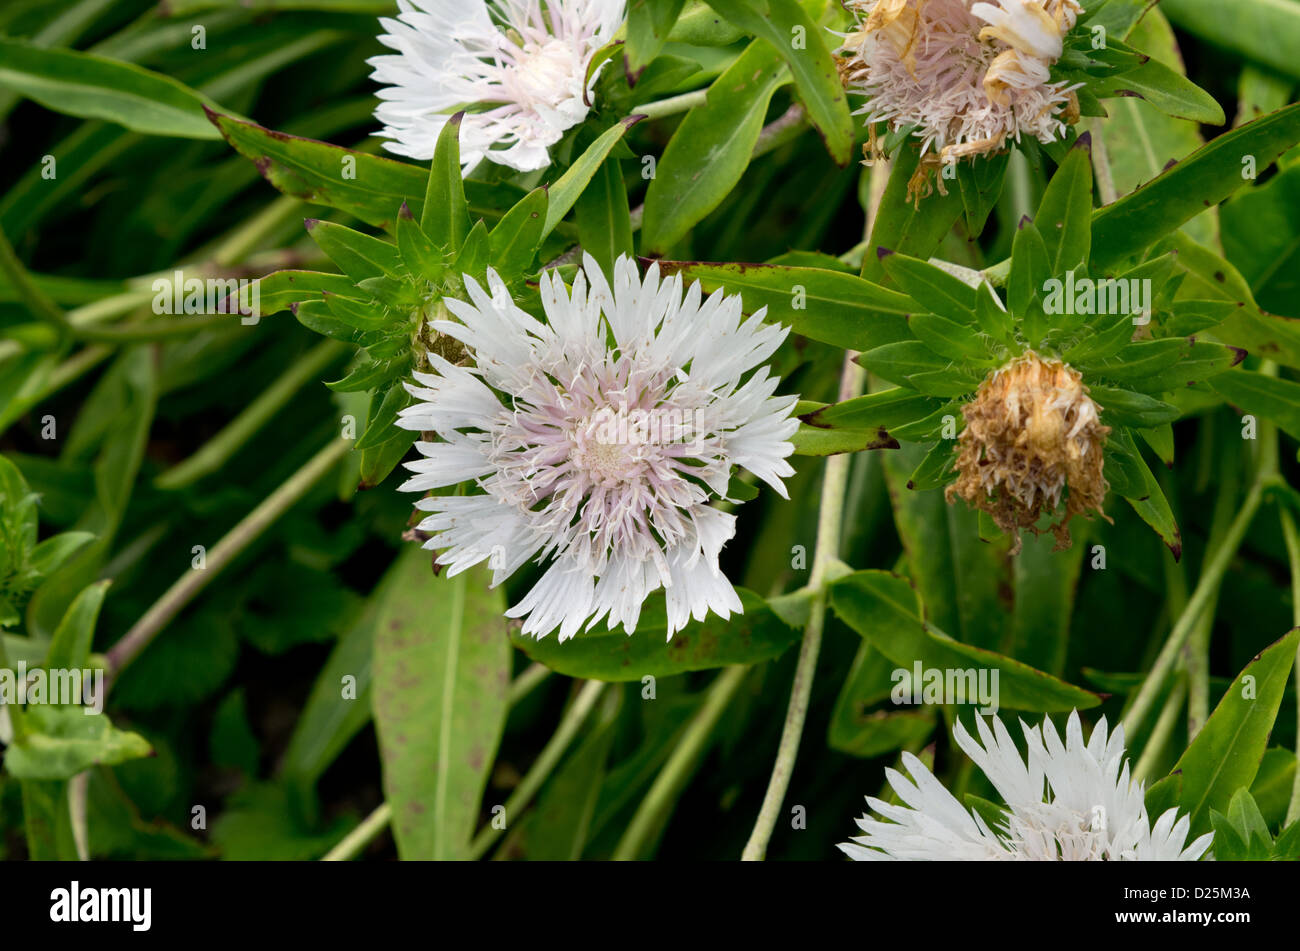 Stokesia laevis 'Pêche Melba'' vivace herbacée Stokes aster Banque D'Images